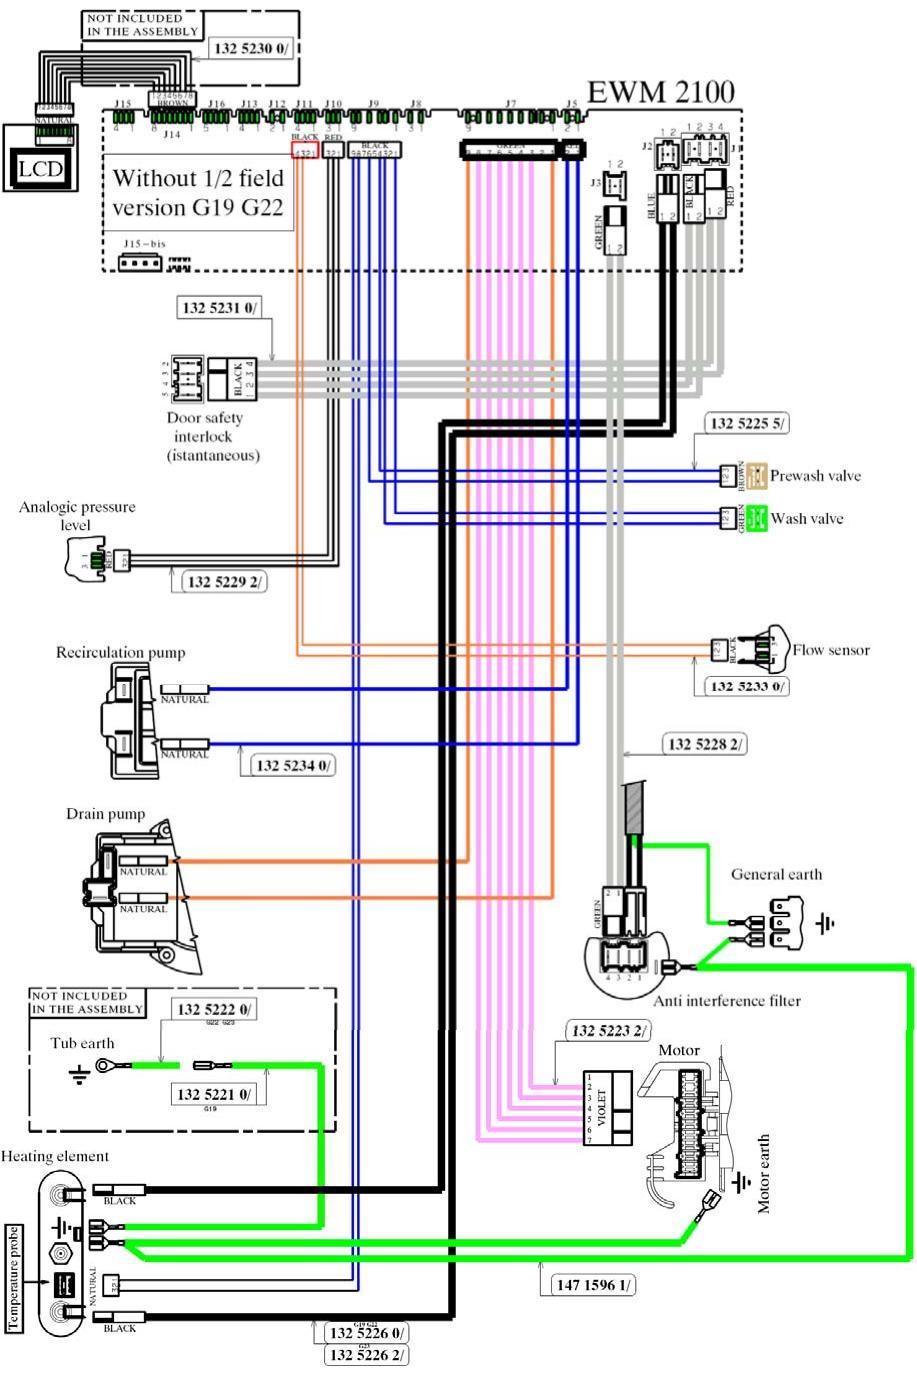 WIRING DIAGRAM IMPORTANT SAFETY NOTICE This diagram has been prepared for use by electrically qualified service technicians.